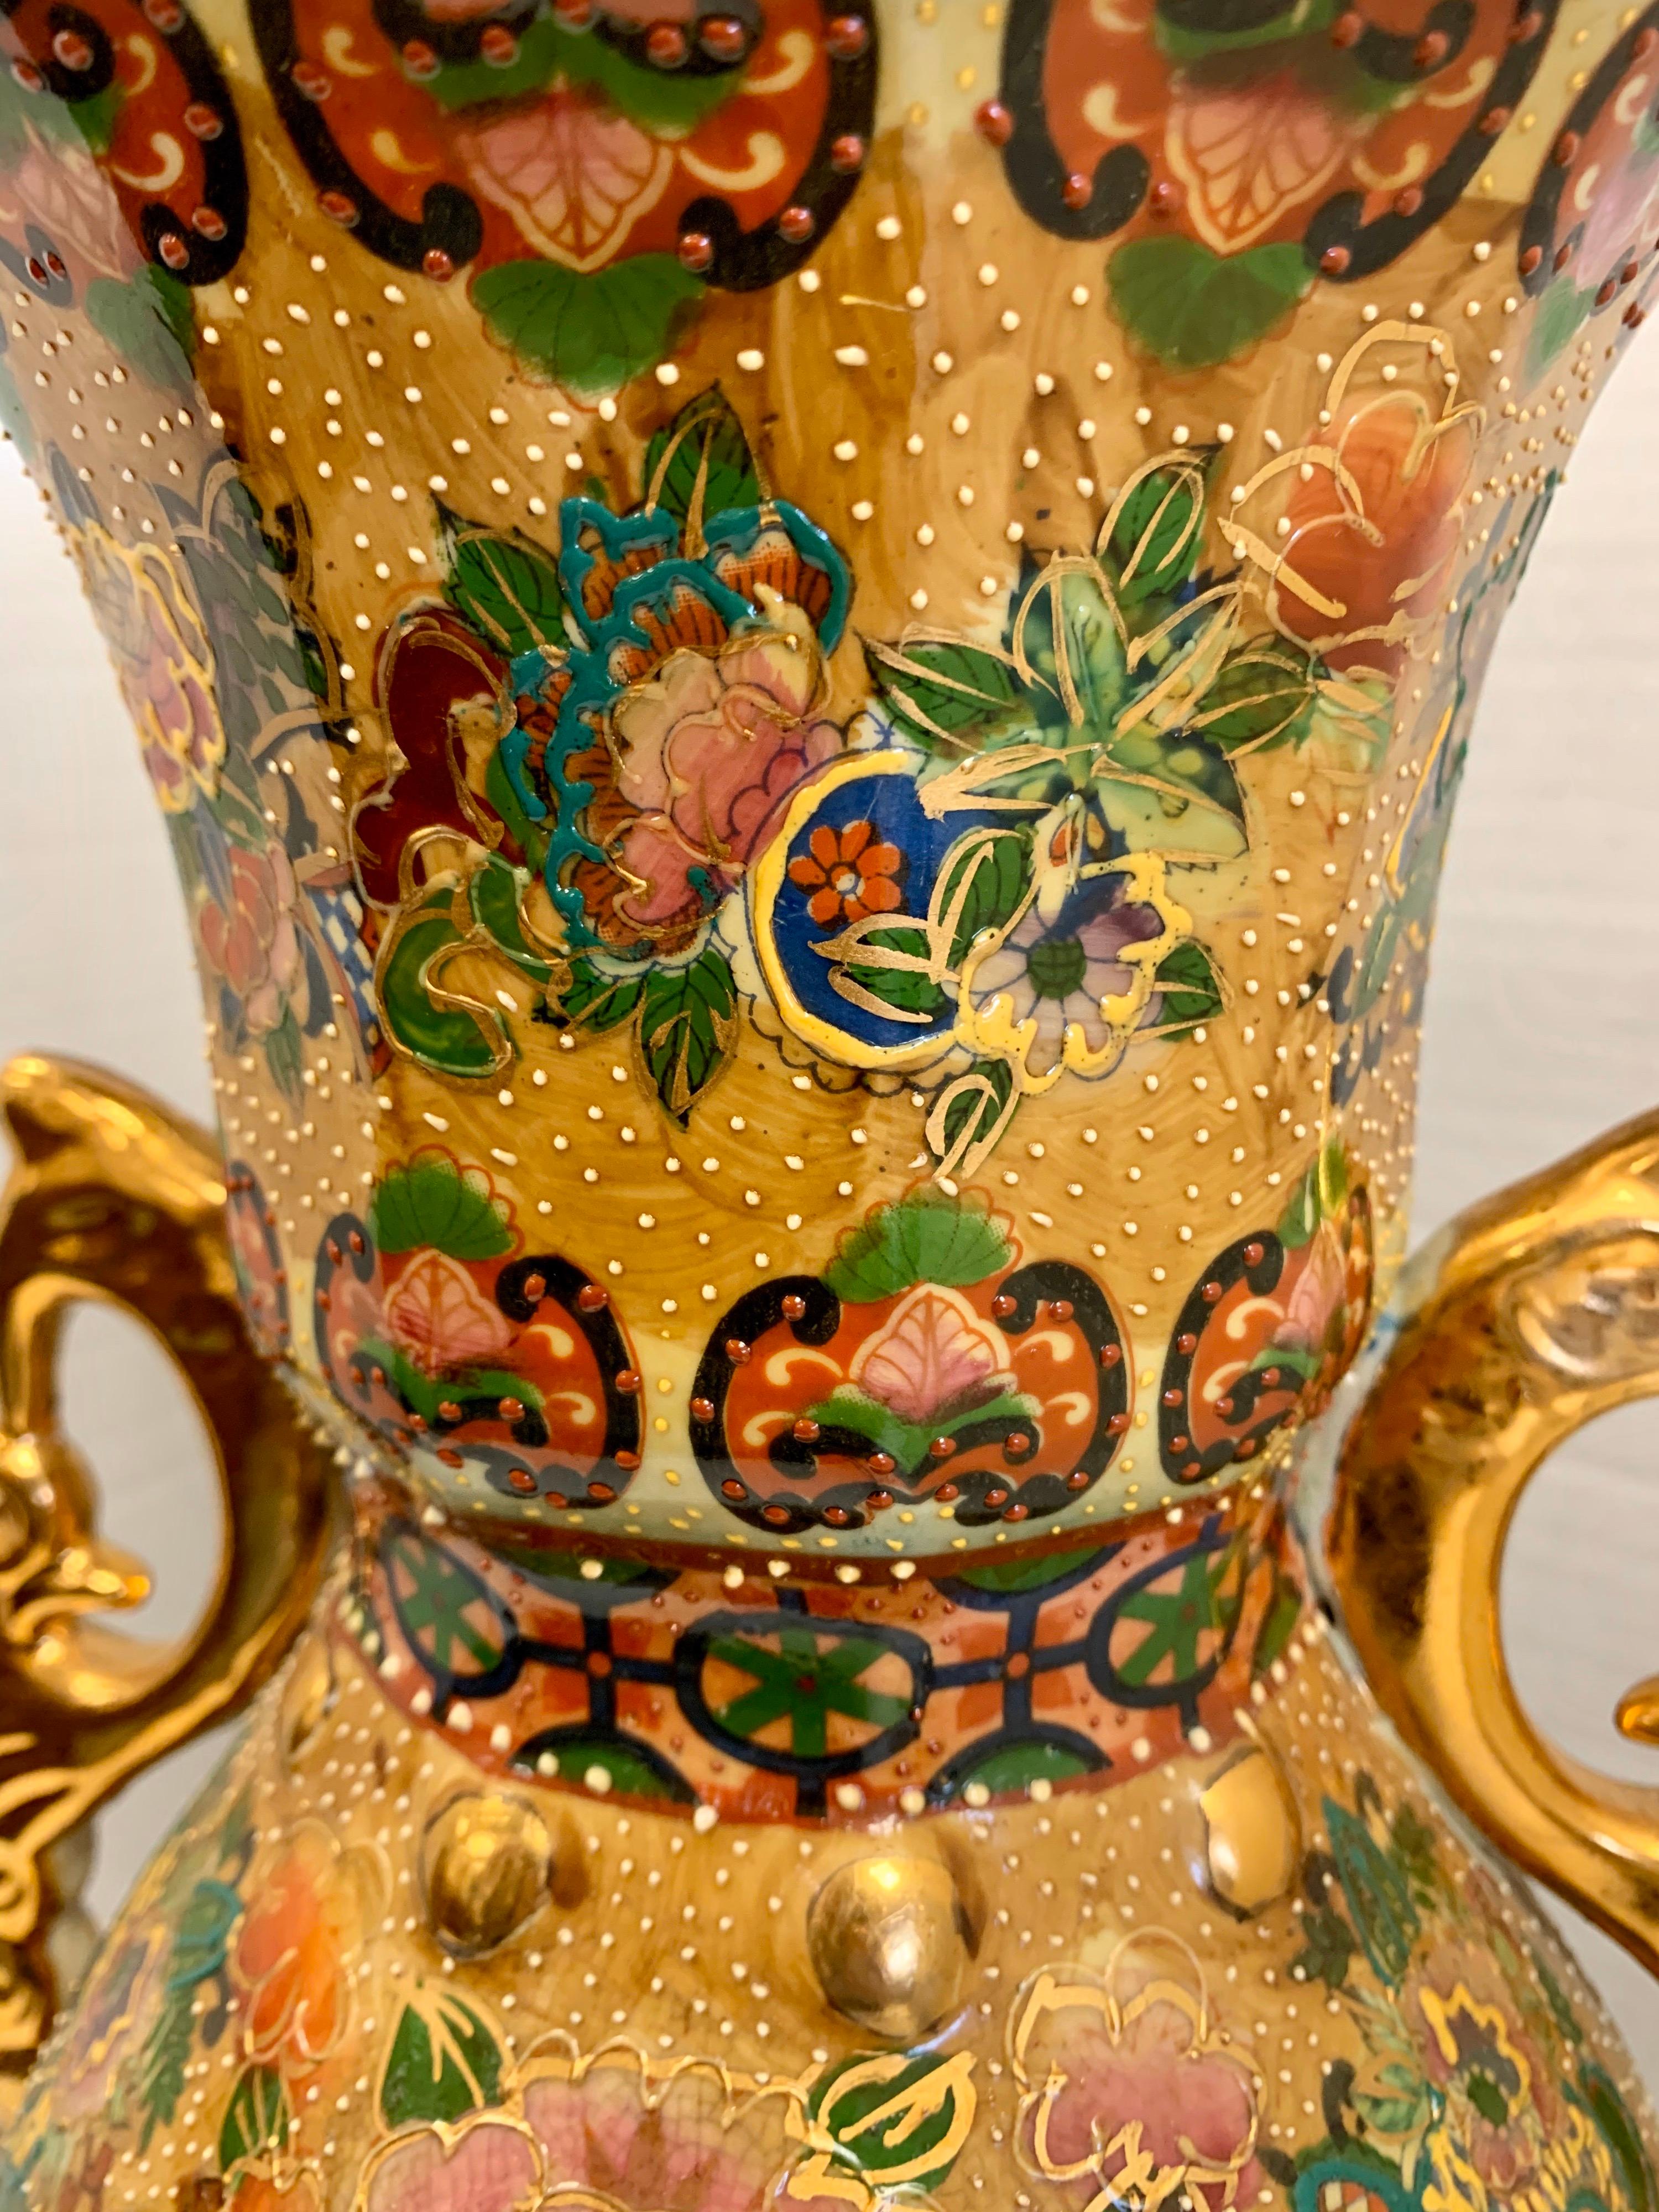 antique japanese vase with gold